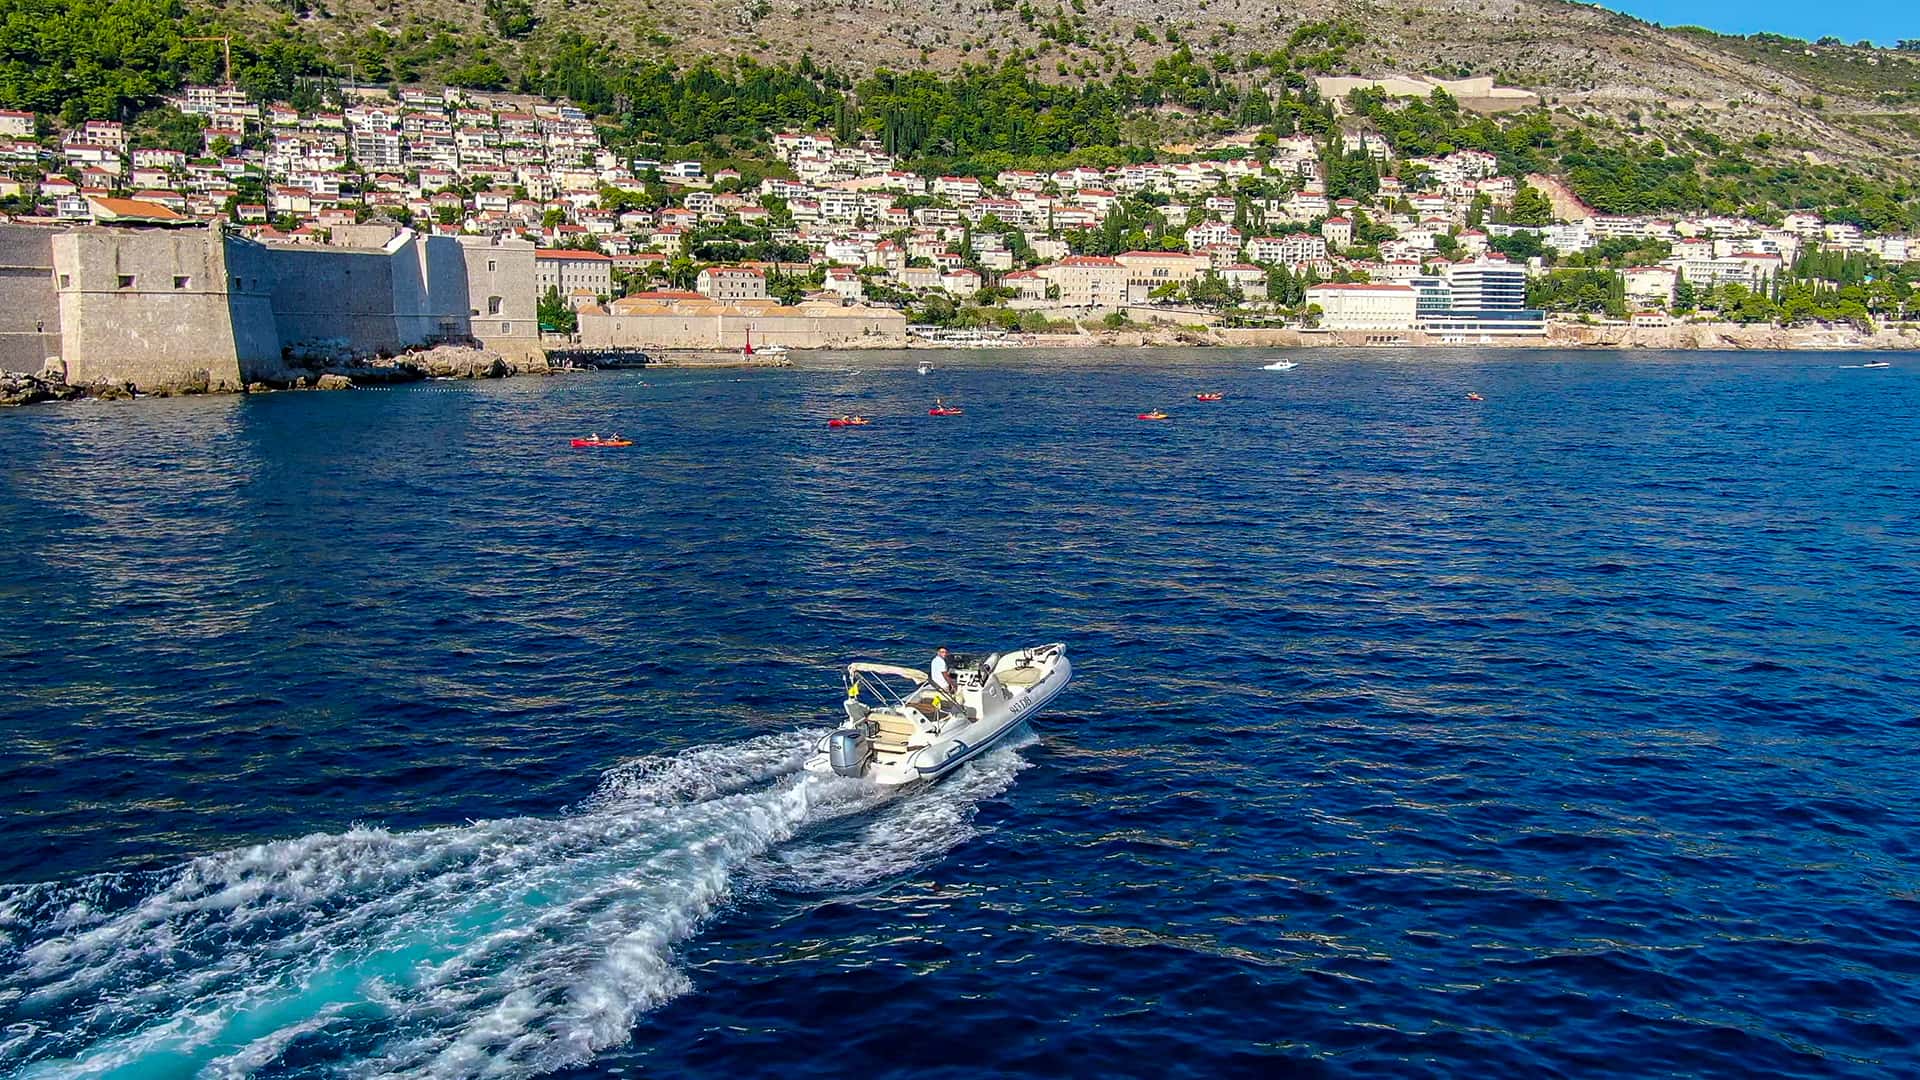 11Transfers by Speed Boat from Dubrovnik